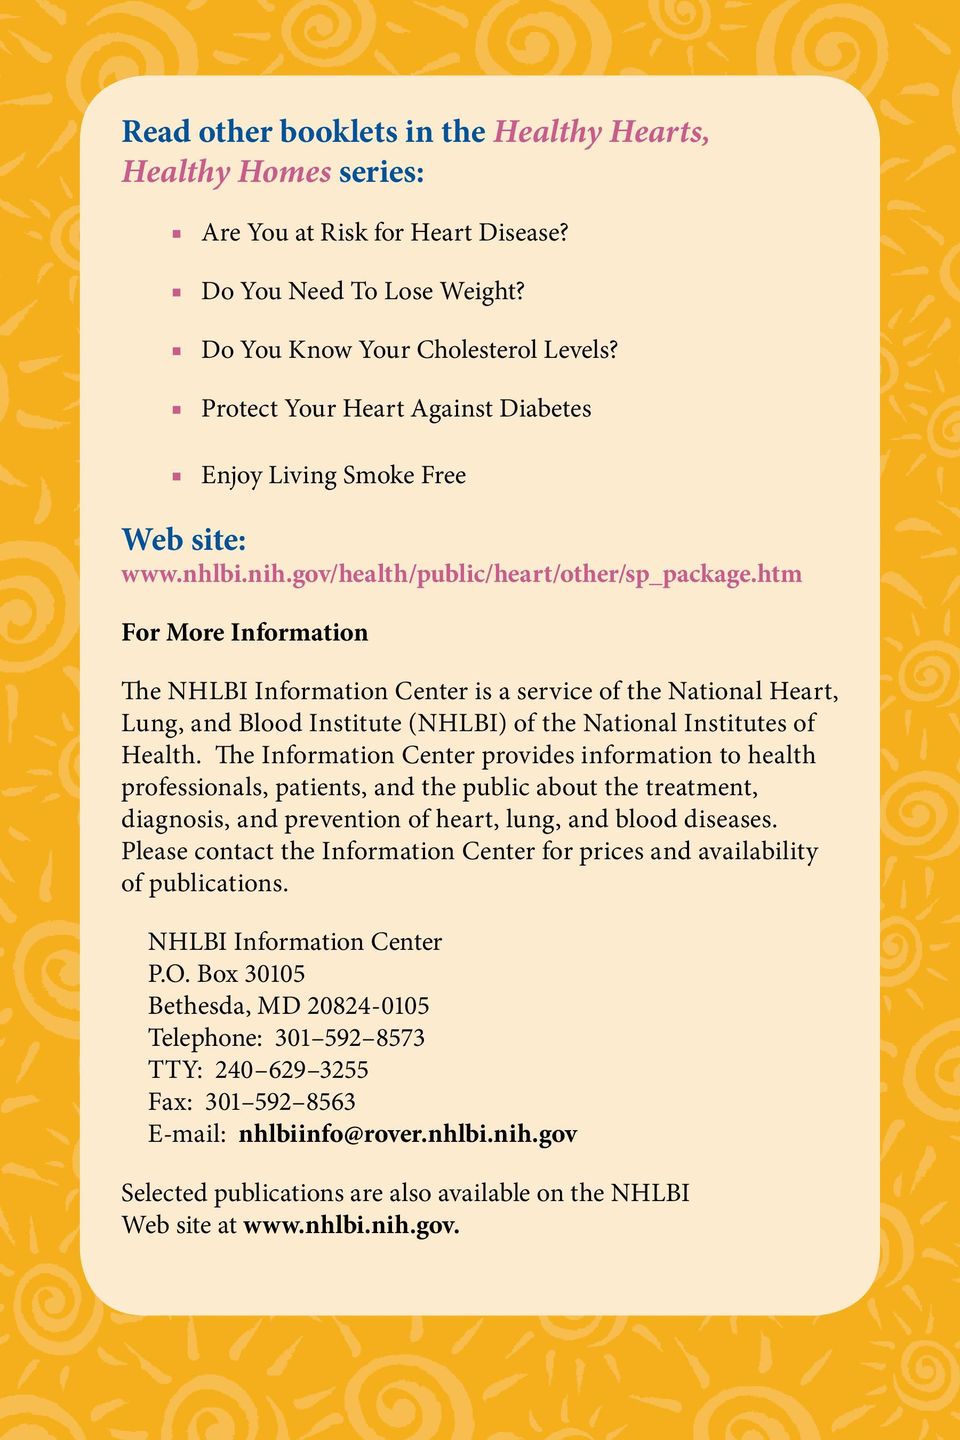 htm For More Information The NHLBI Information Center is a service of the National Heart, Lung, and Blood Institute (NHLBI) of the National Institutes of Health.